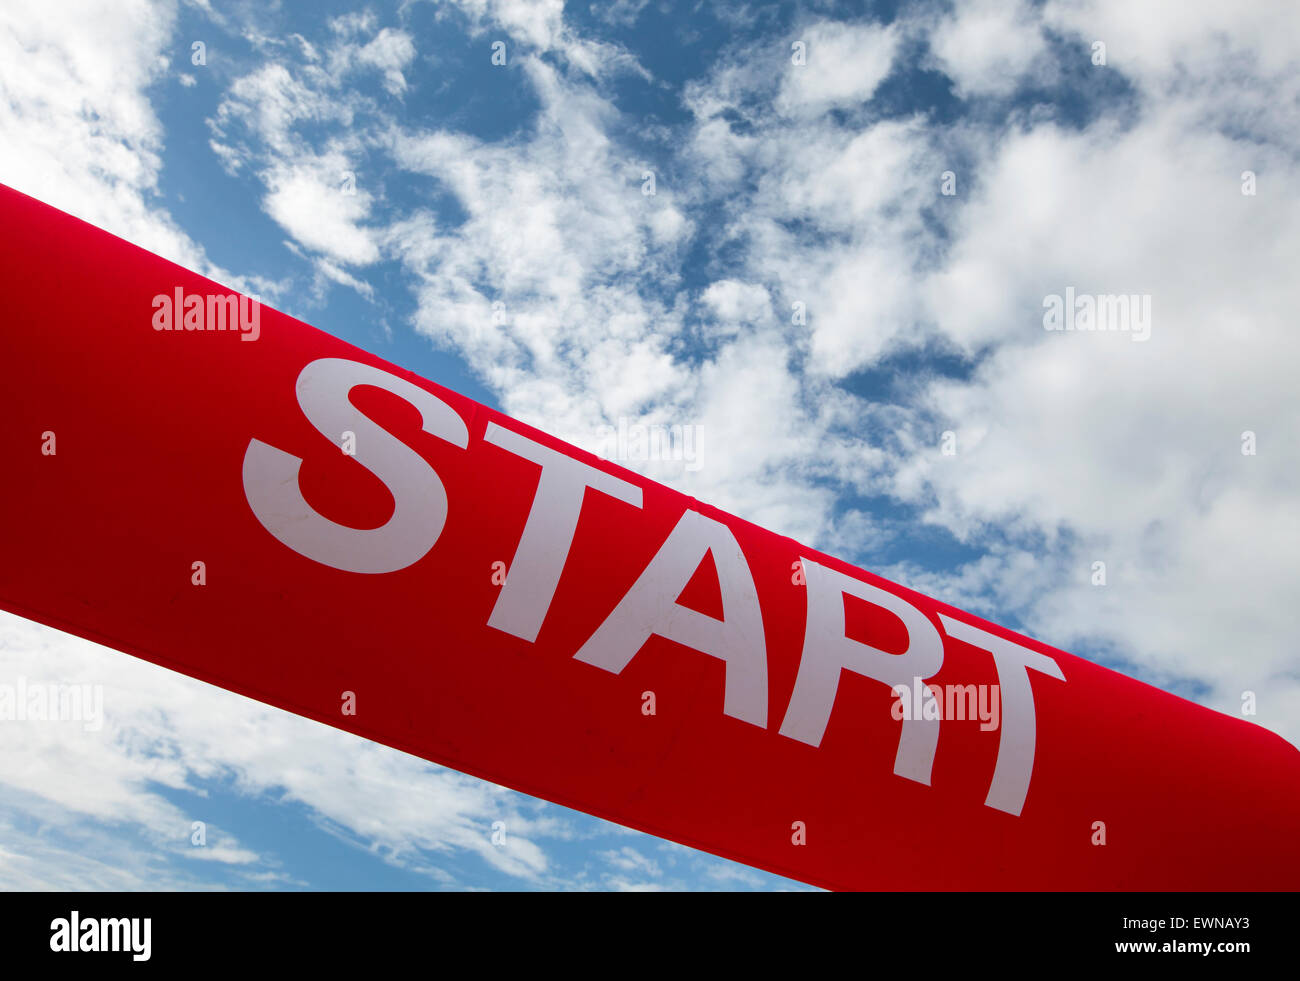 red start line against a blue cloudy sky Stock Photo